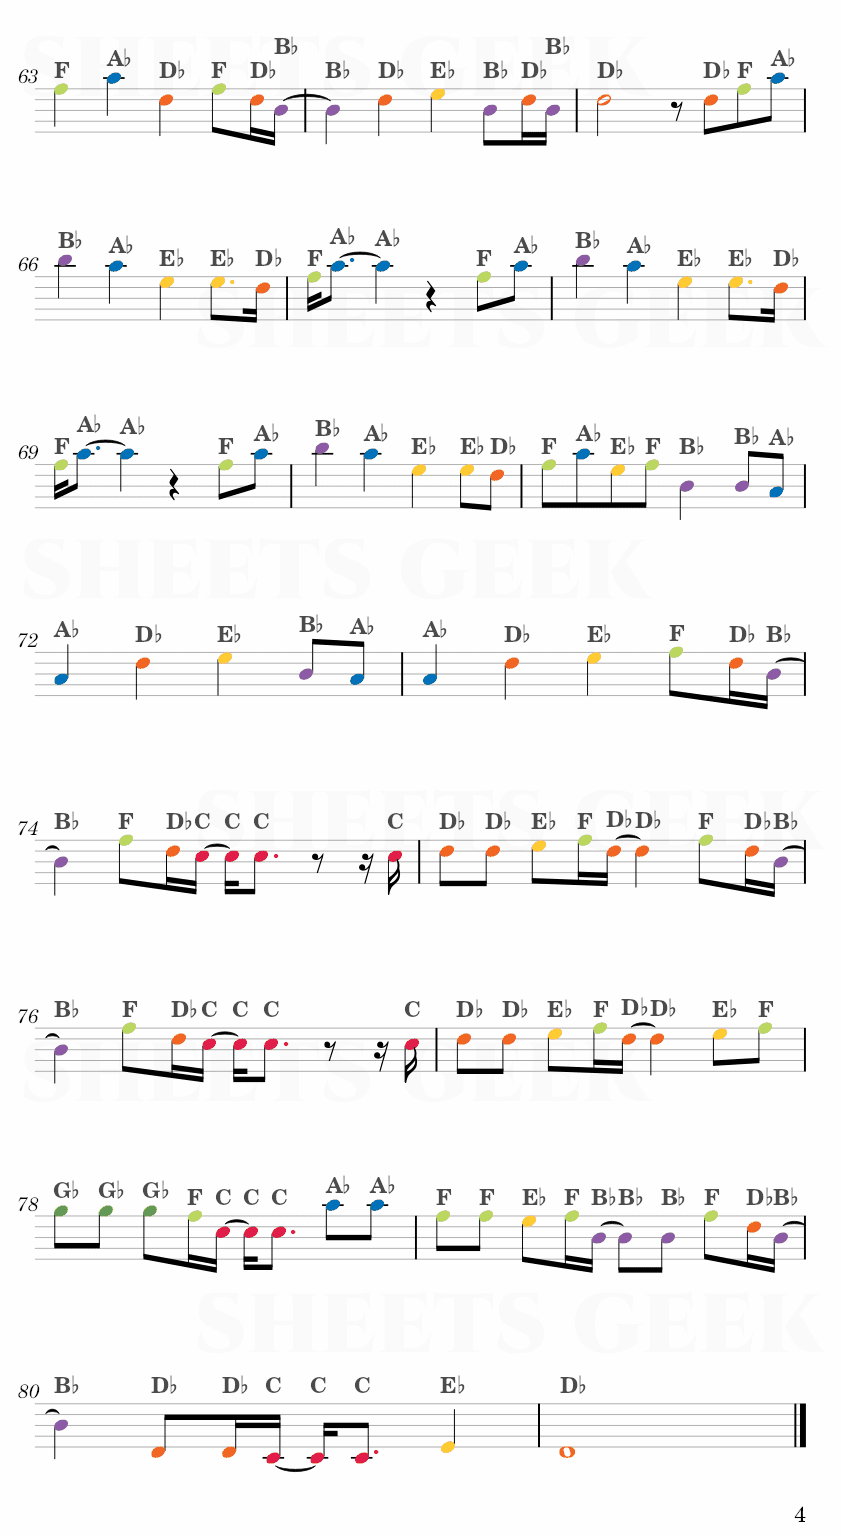 All Falls Down - Alan Walker Easy Sheet Music Free for piano, keyboard, flute, violin, sax, cello page 4